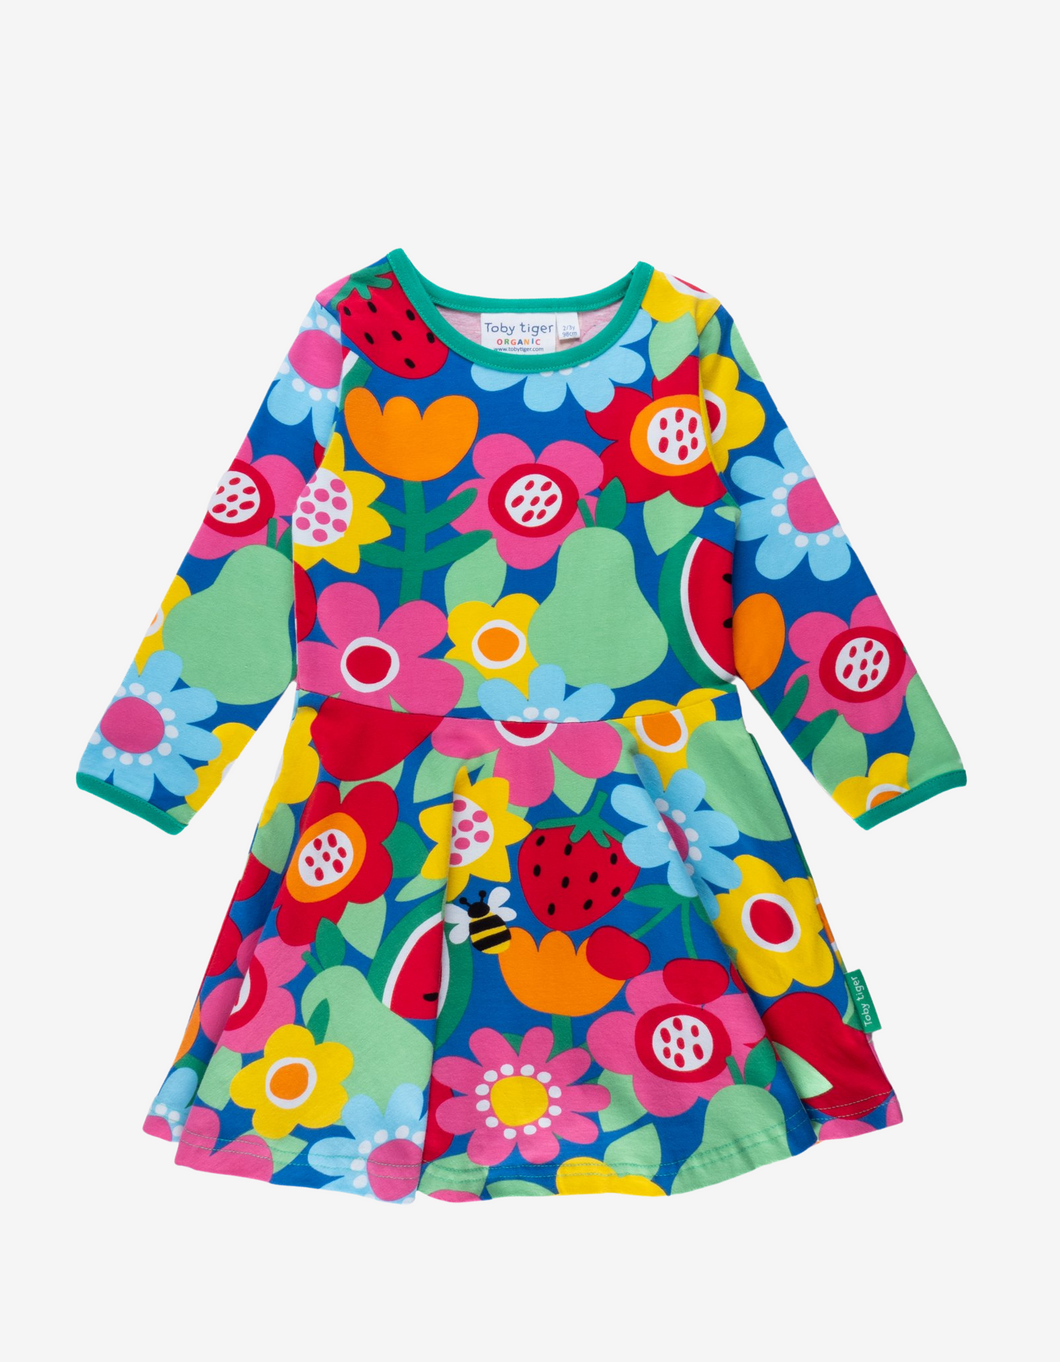 Dress, long sleeves, organic cotton with fruit flower print